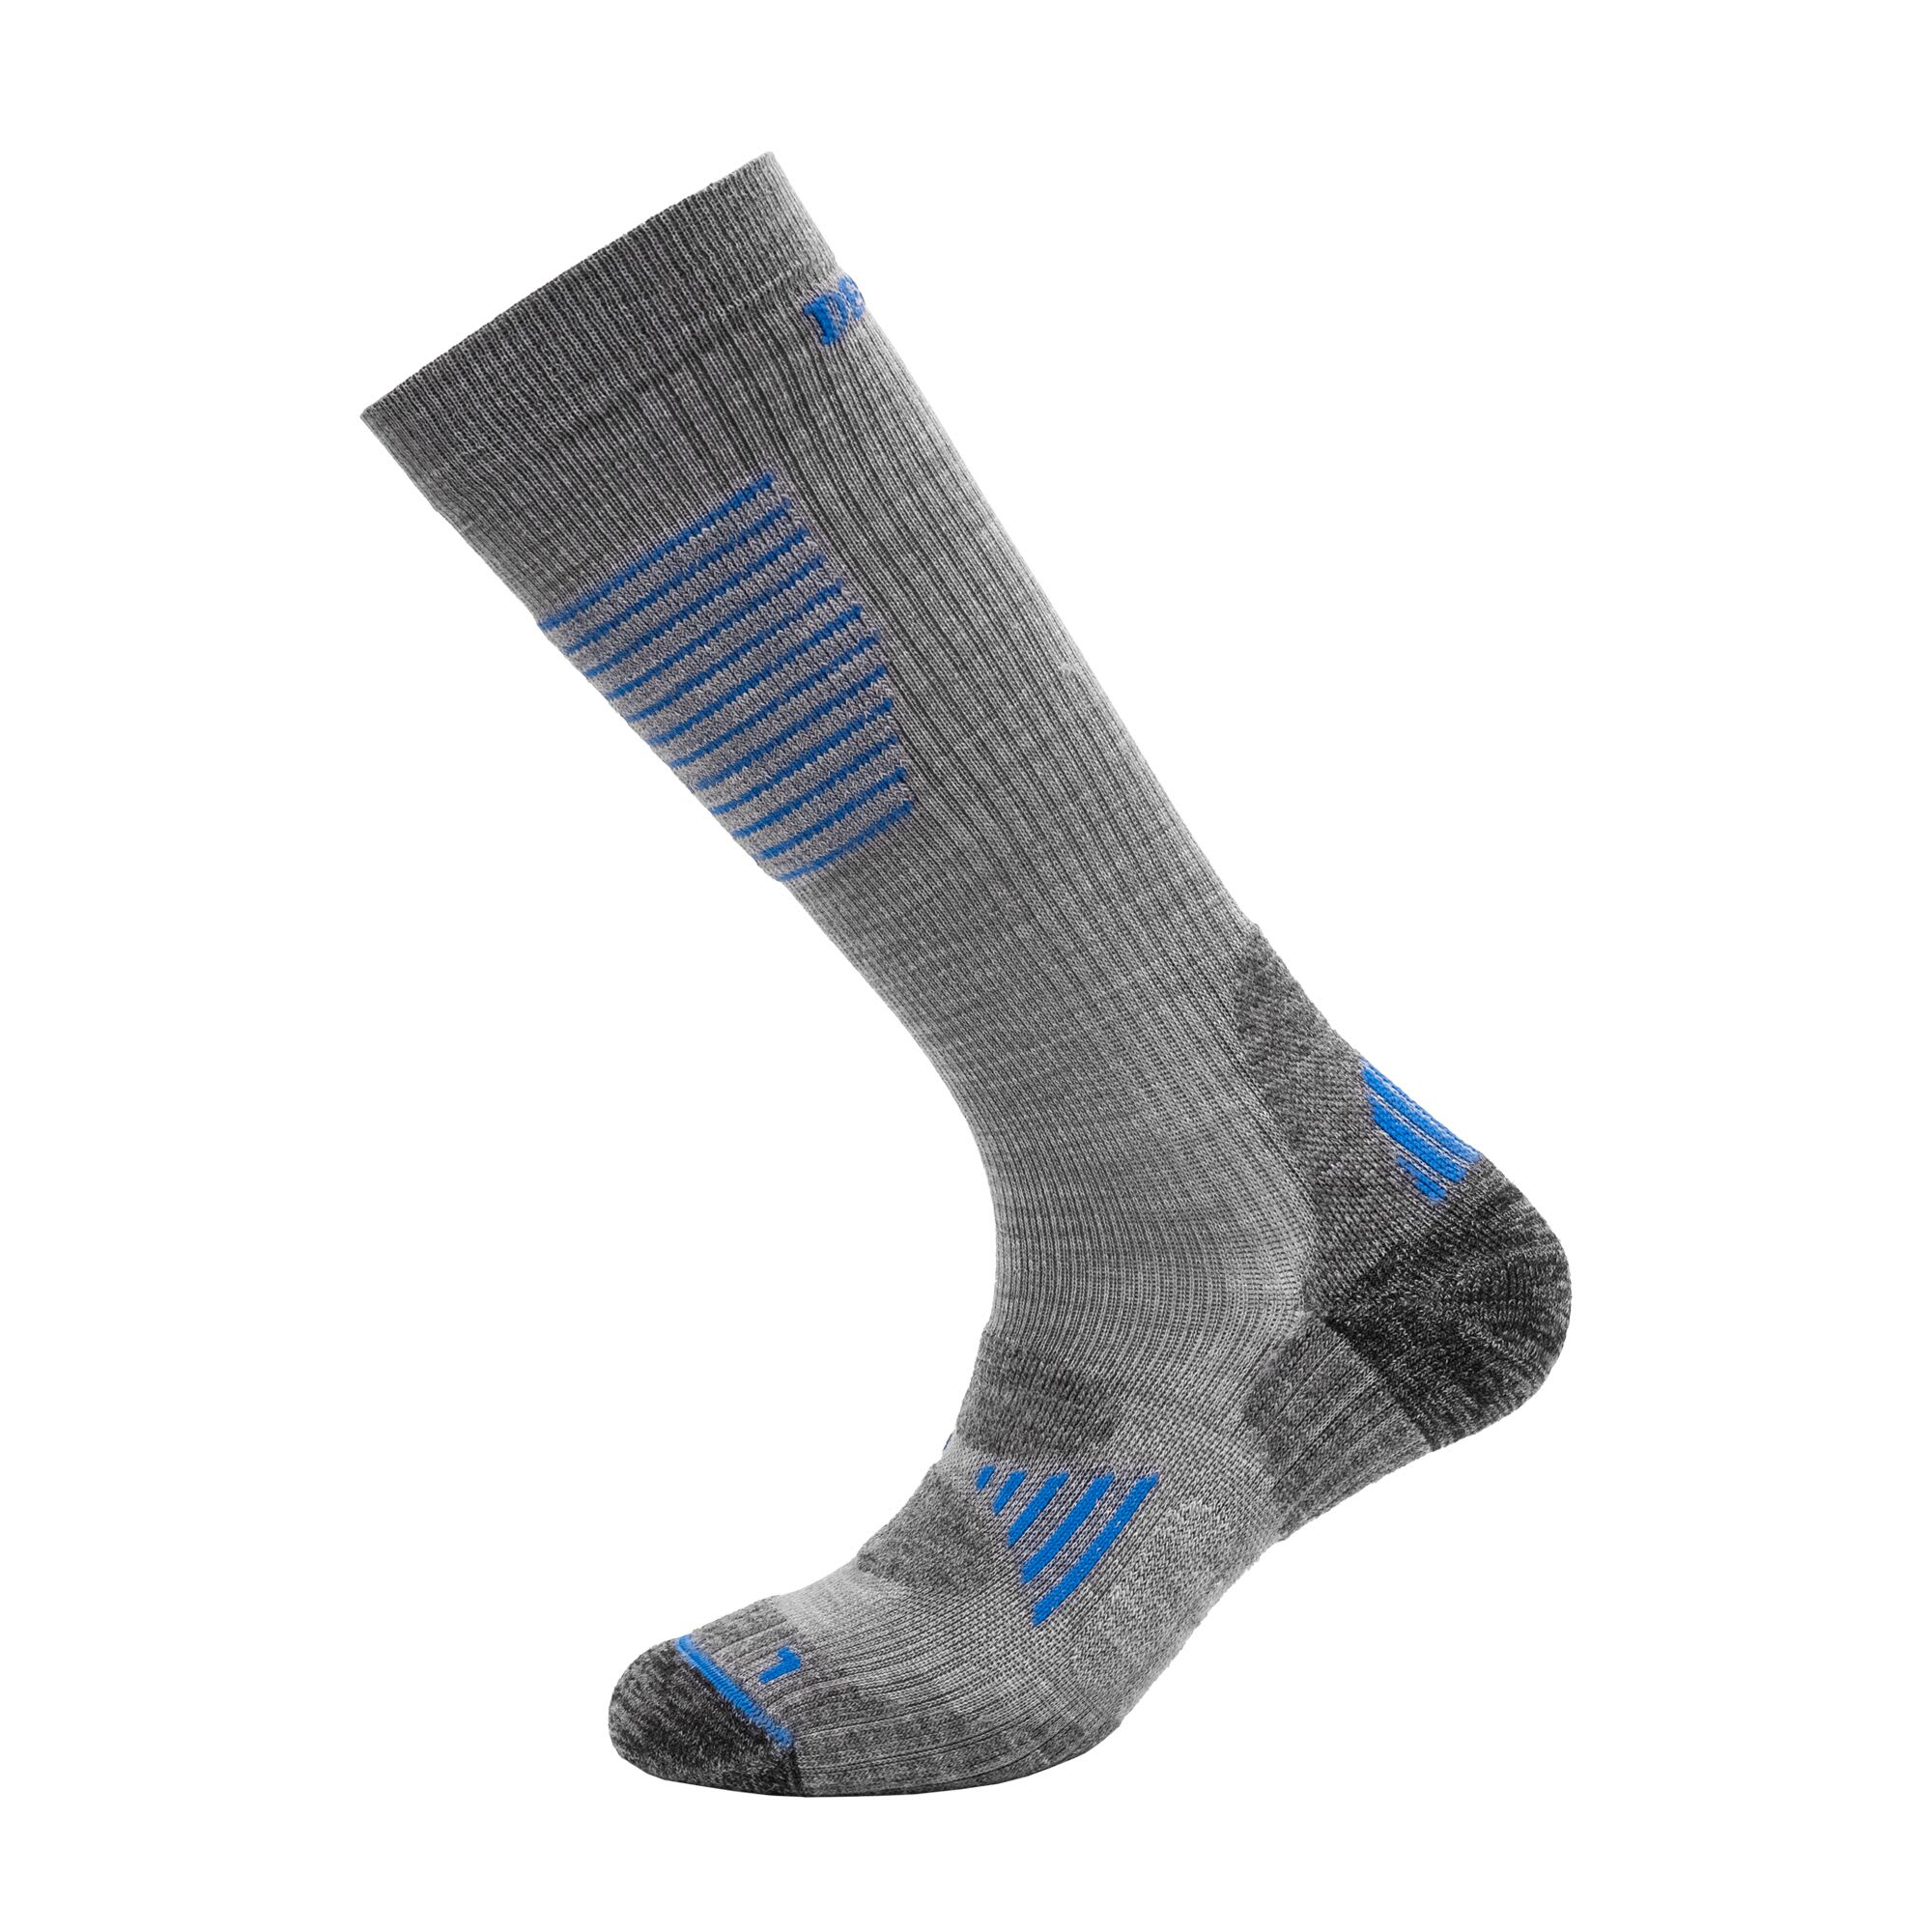 Buy Devold Cross Country Sock from Outnorth